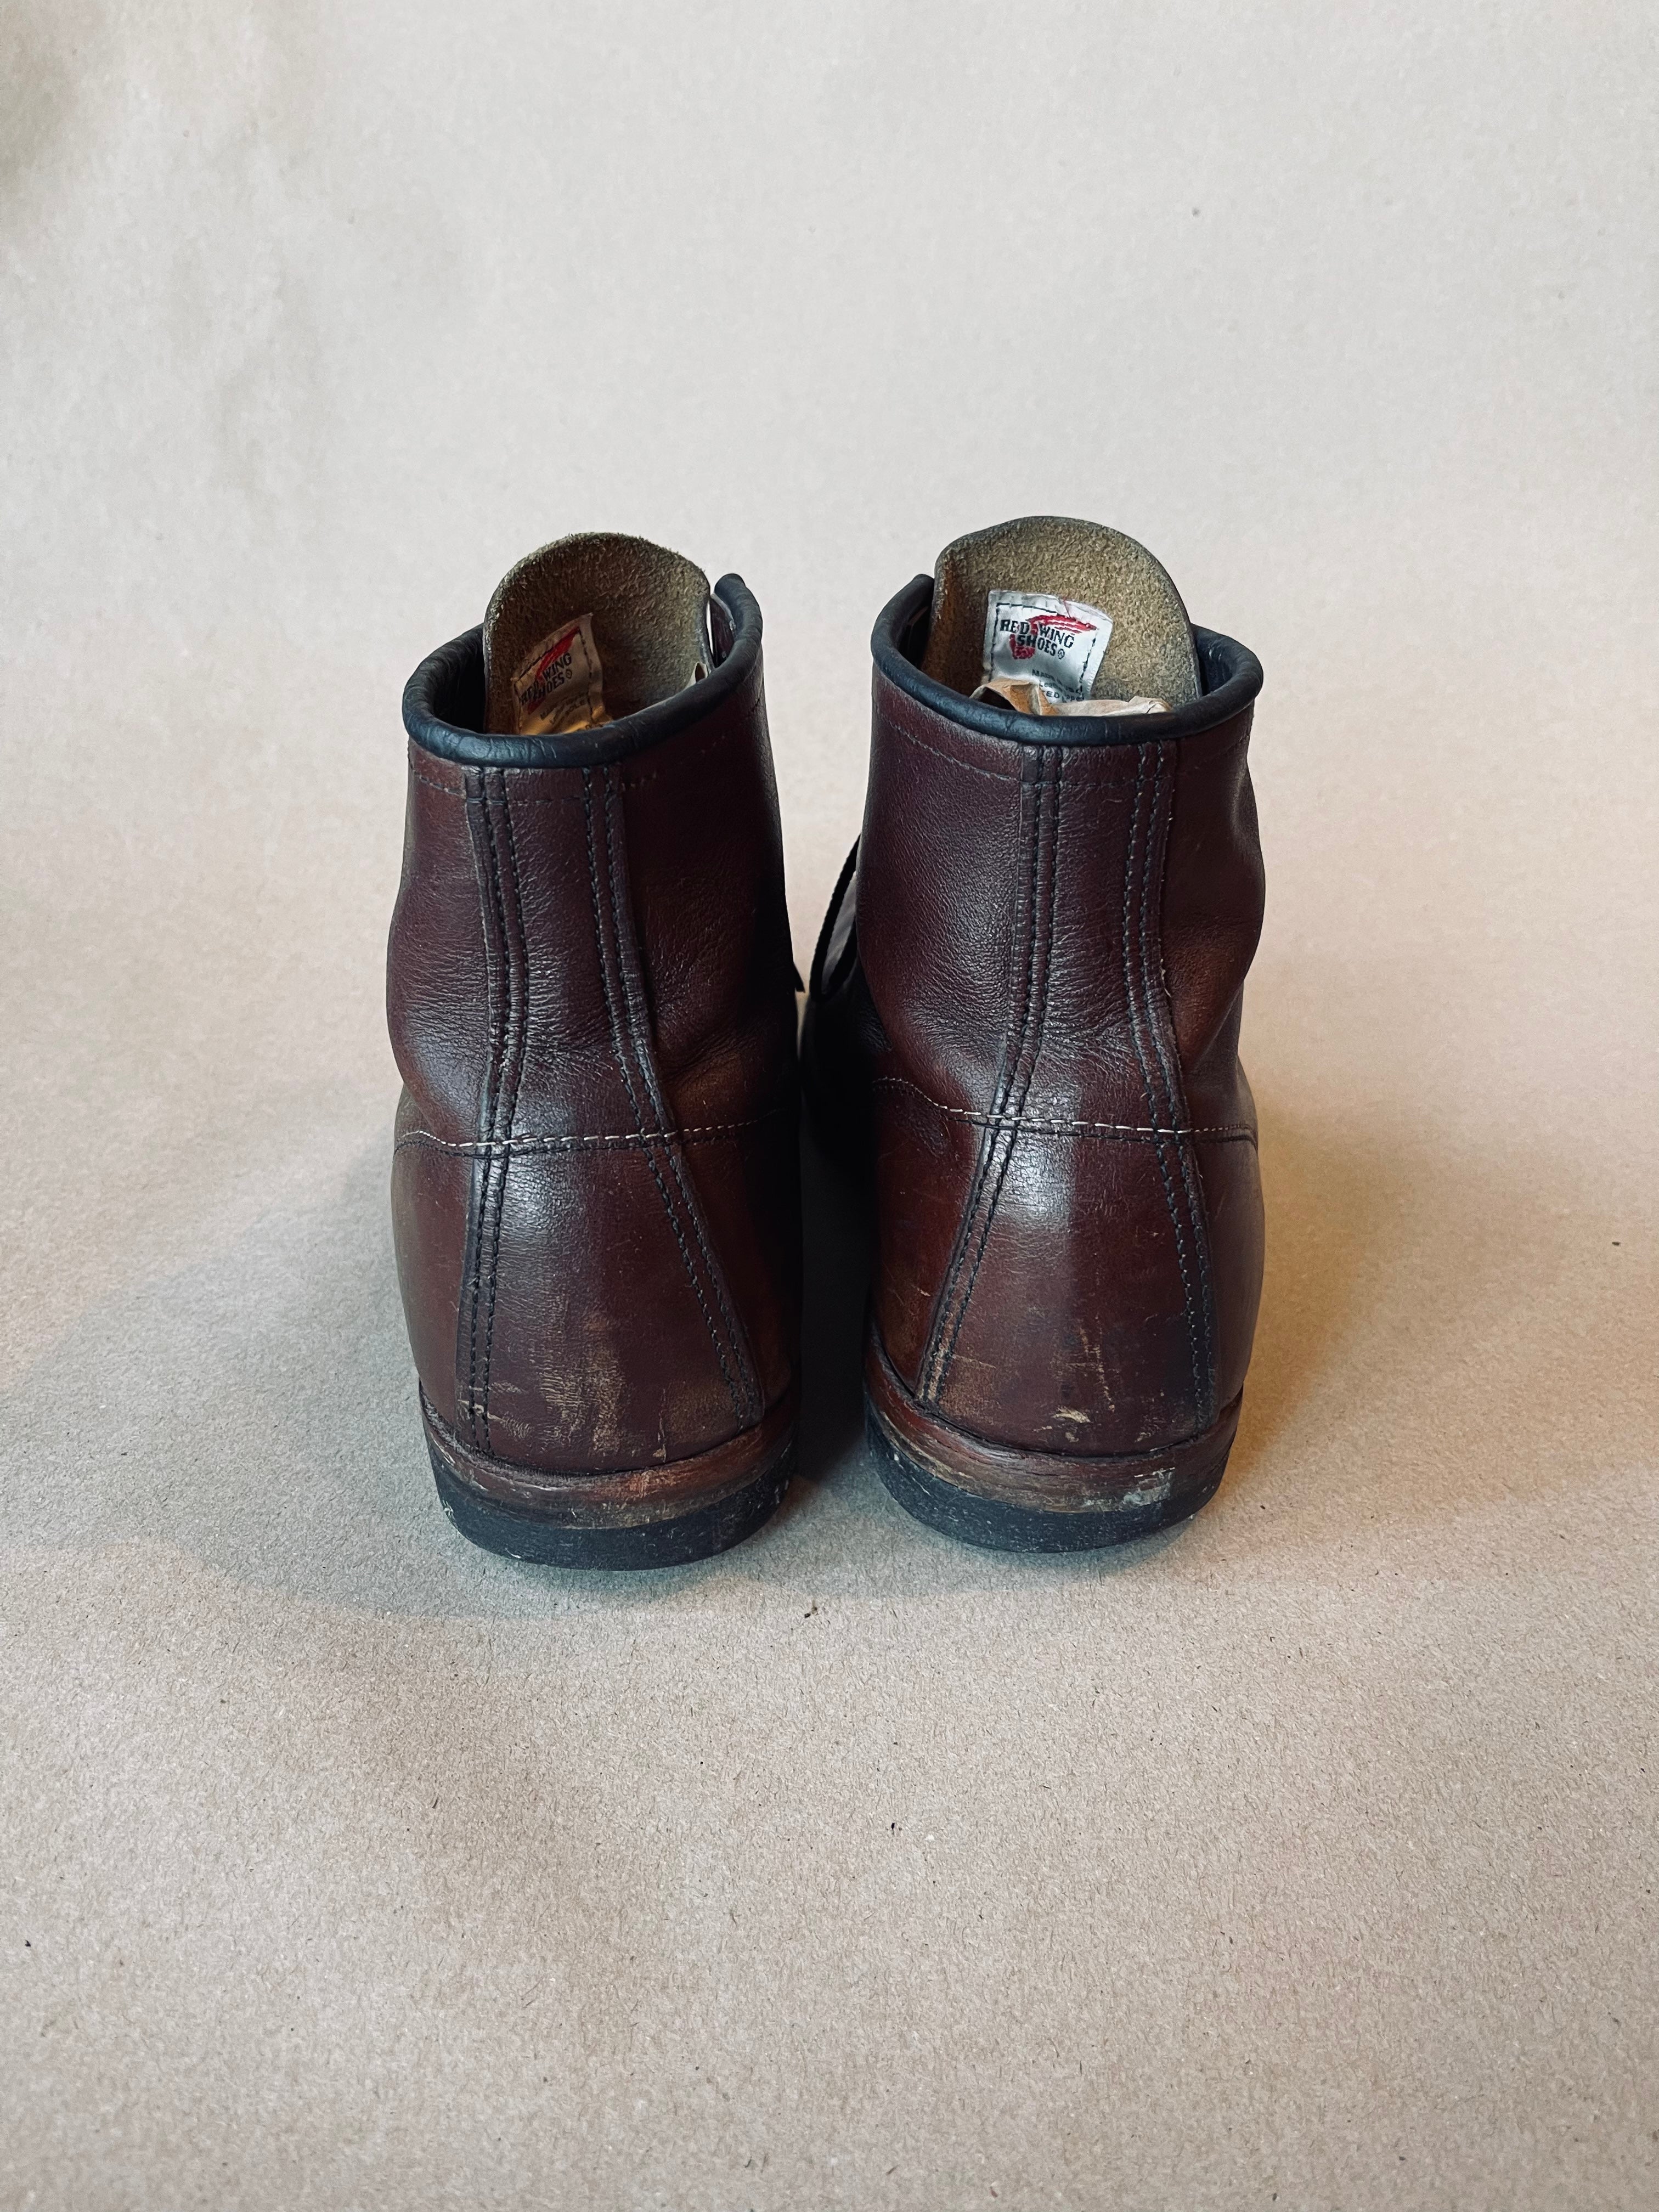 Vintage Red Wing Beckman Round Toe Boots | M11.5